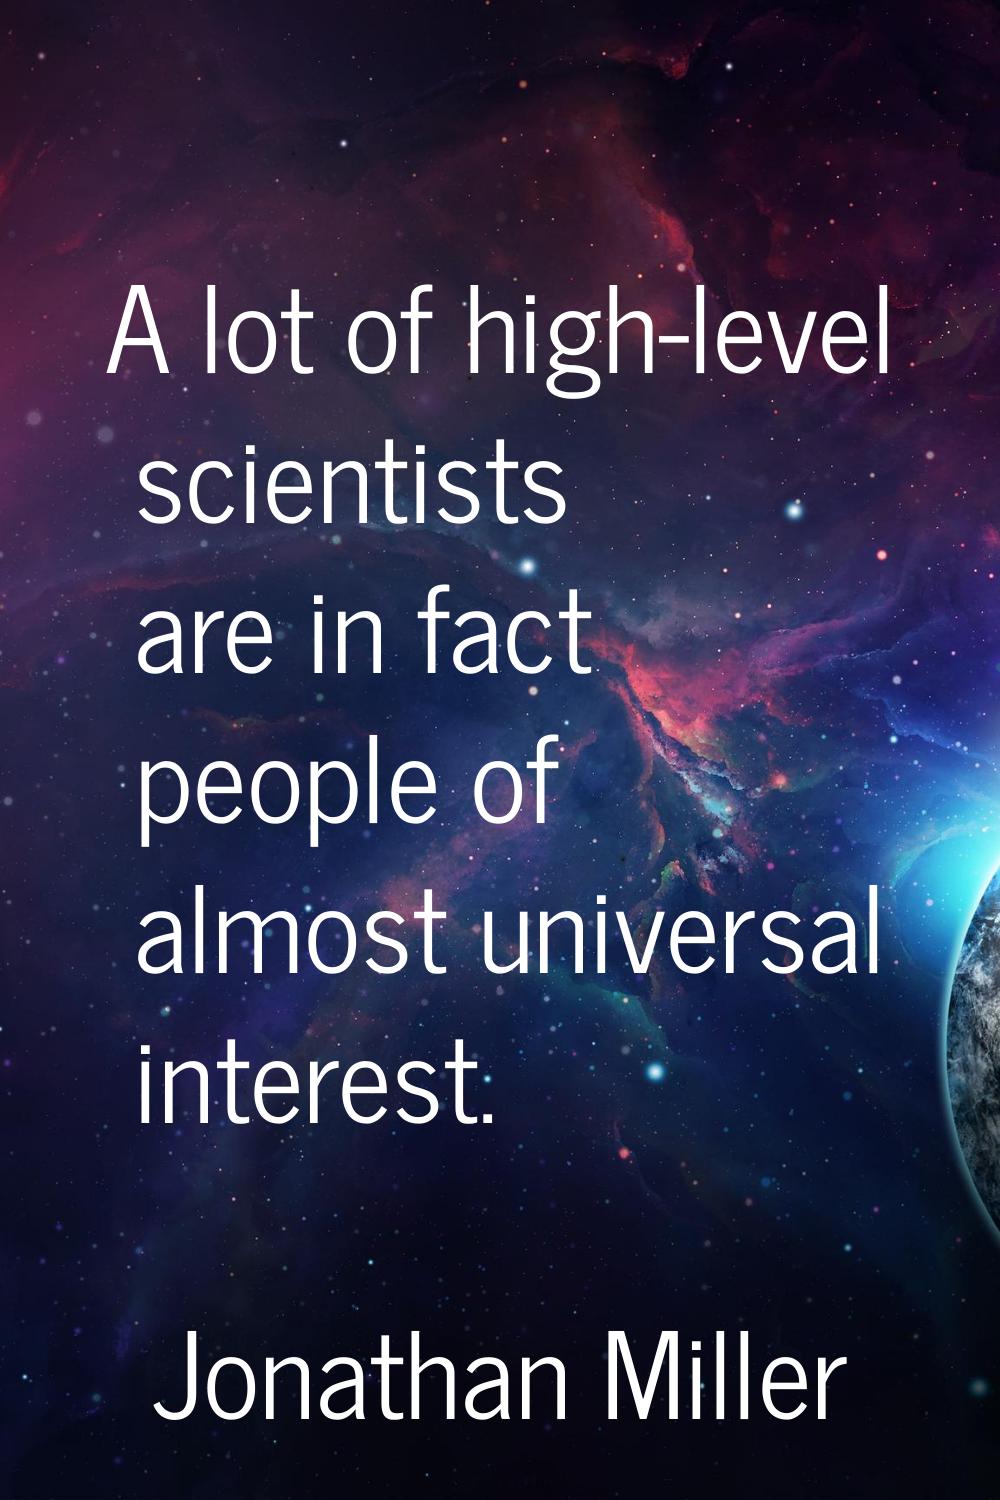 A lot of high-level scientists are in fact people of almost universal interest.